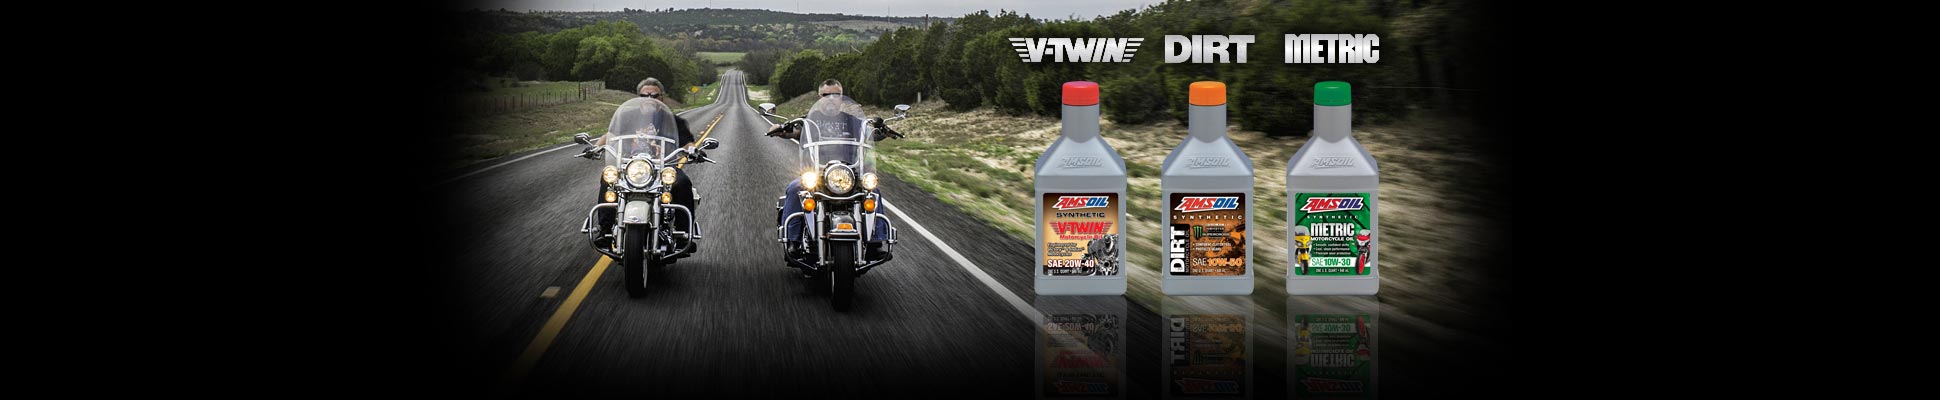 Motorcycle Oils